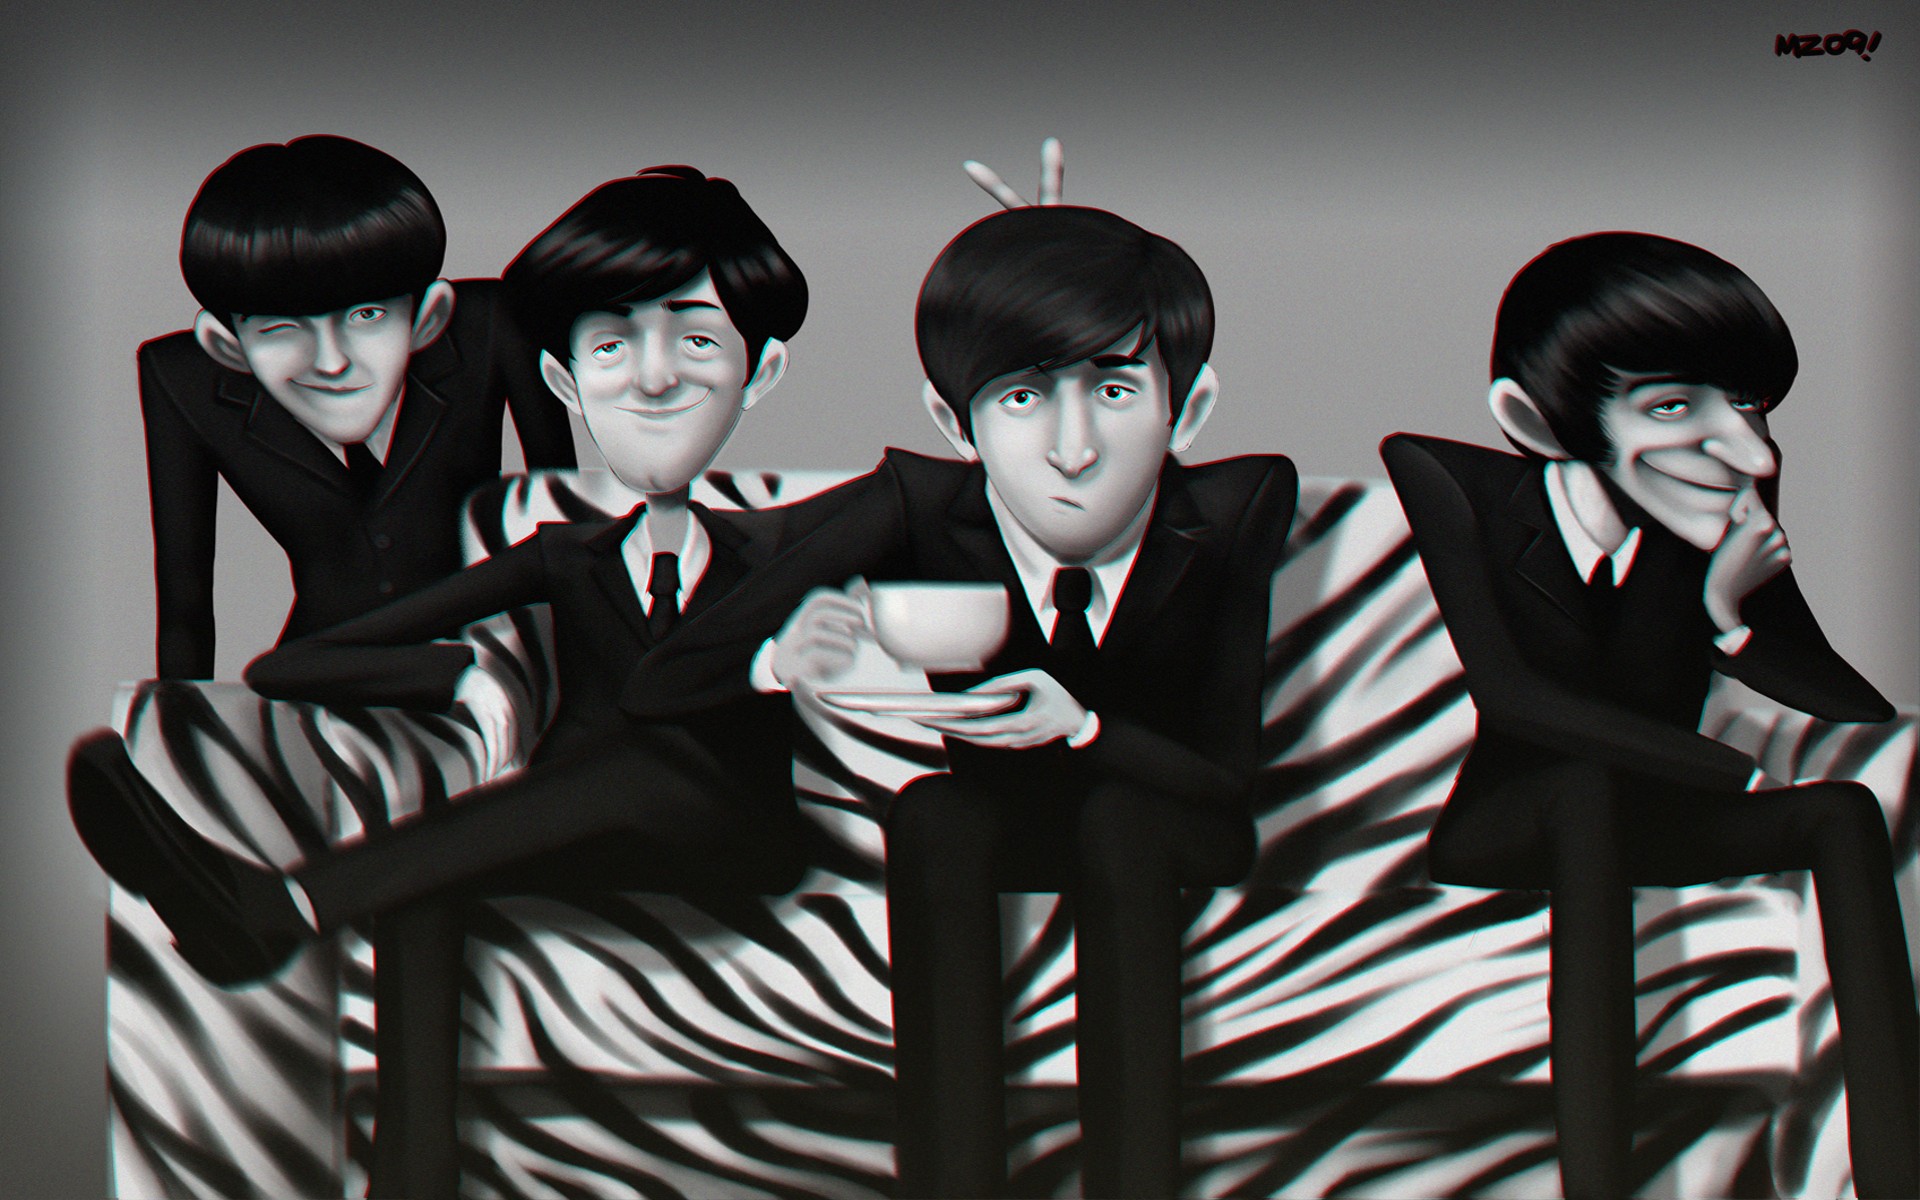 General 1920x1200 The Beatles band gray humor music cup hand gesture caricature digital art monochrome watermarked